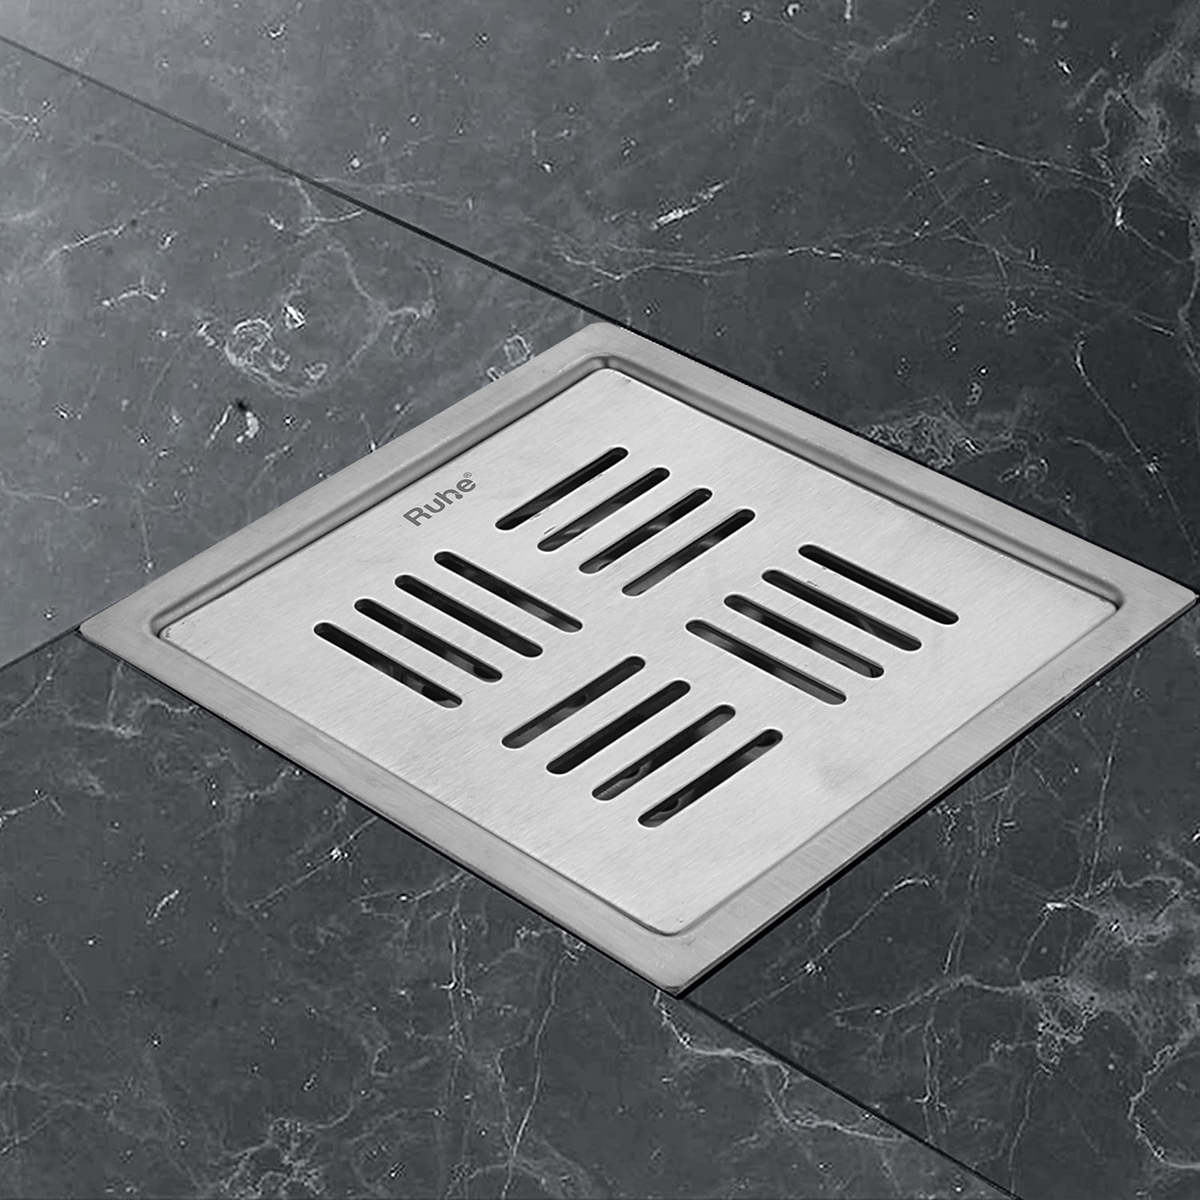 Ruby Square 304 Grade Floor Drain (6 x 6 Inches) - by Ruhe®